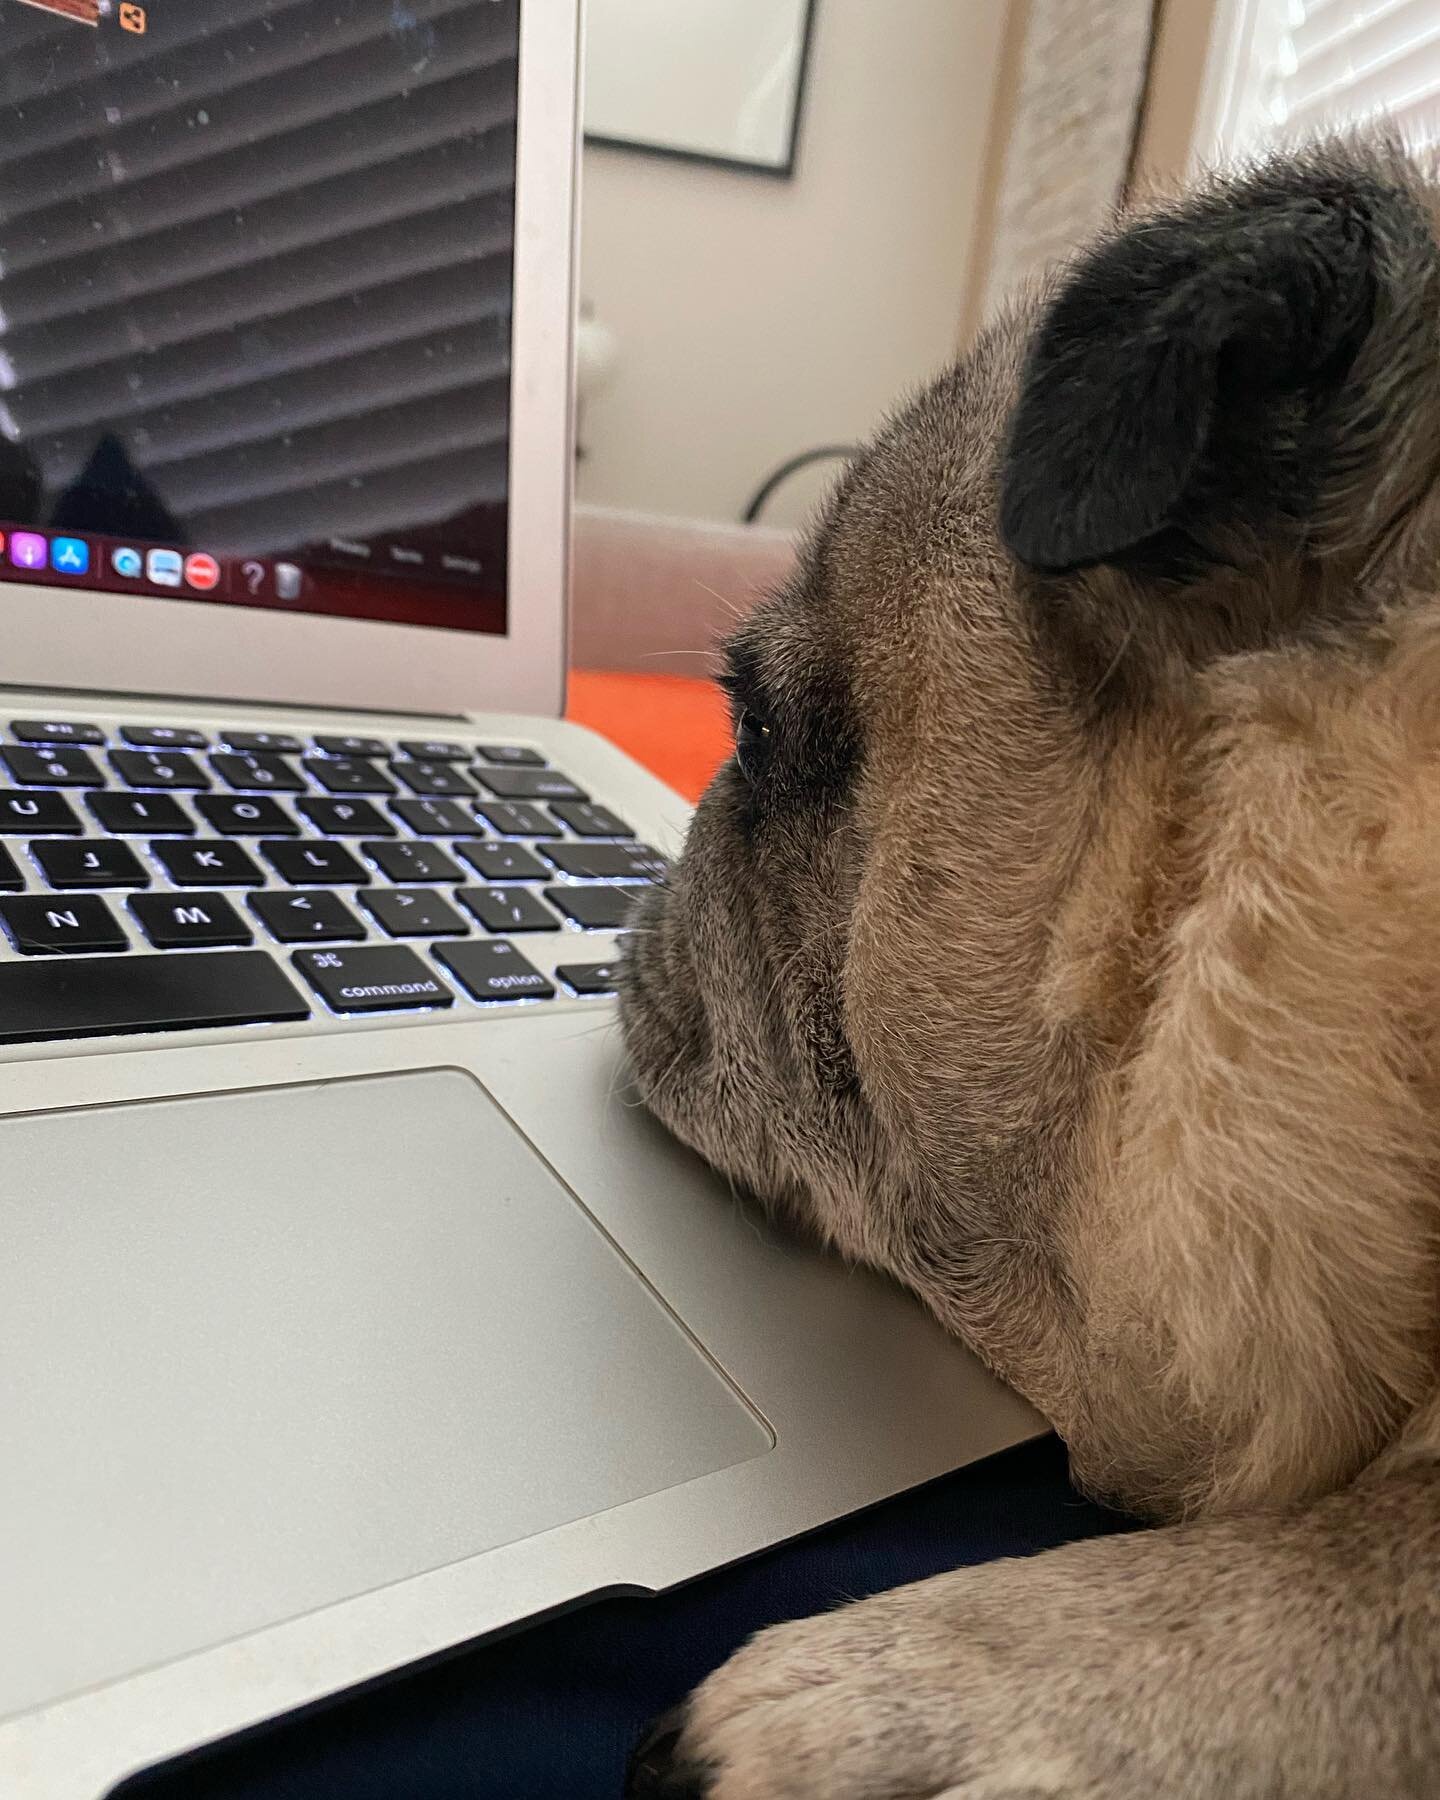 My apologies to any of my clients who get programming today. My newest employee @drhankpug is trying to figure out the trackpad 🤷🏼&zwj;♂️

#dogsitting #rescuepugs #doghelper #newemployee #dogsofinstagram #workingfromhomelife